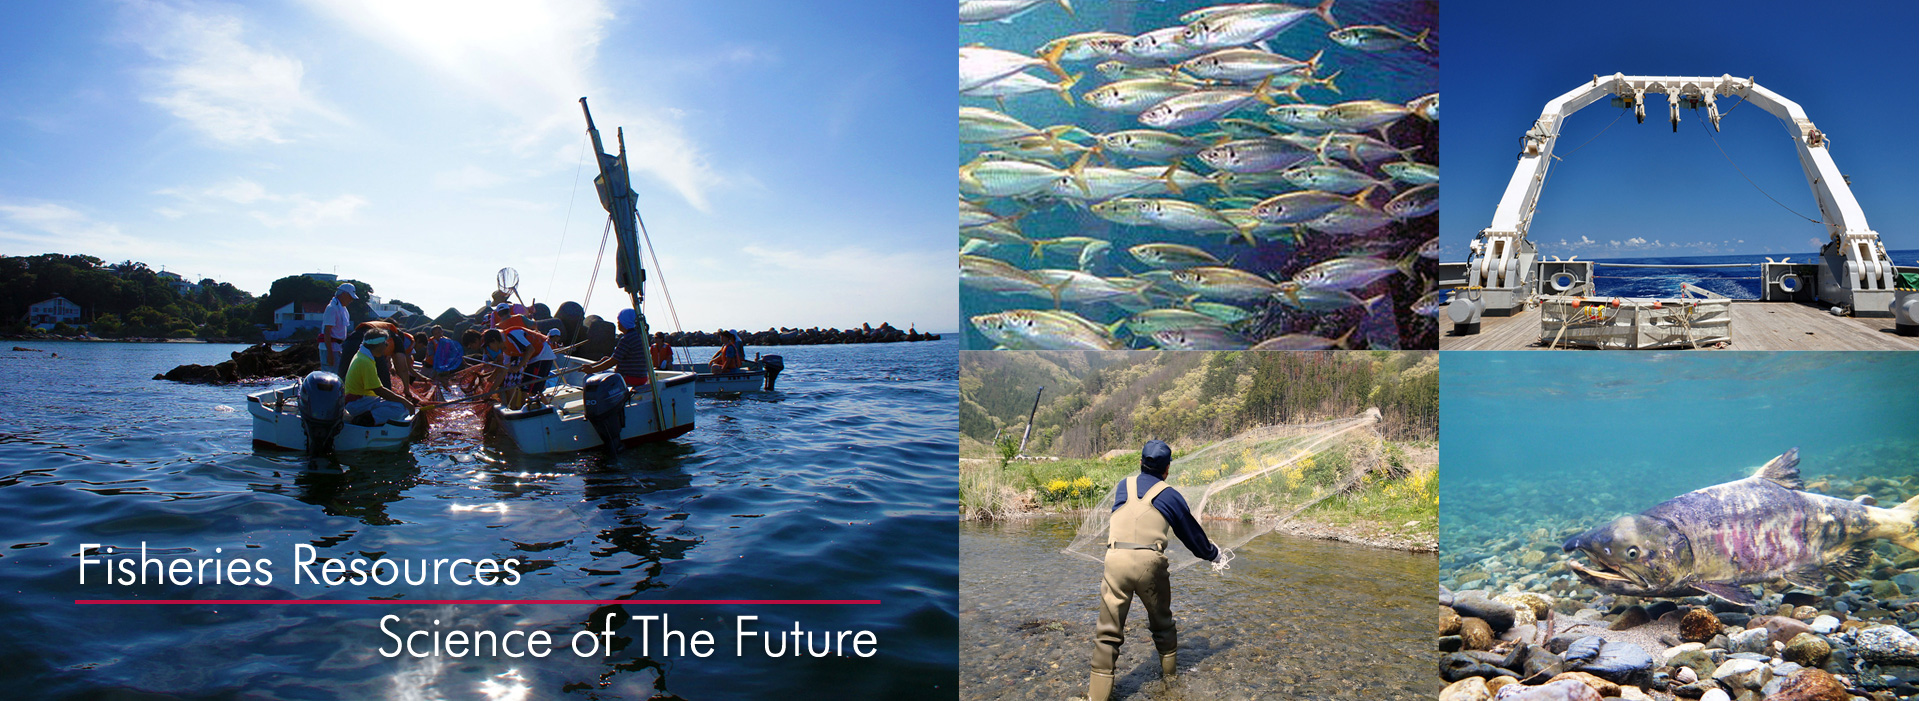 Fisheries Resources / Future of the Science